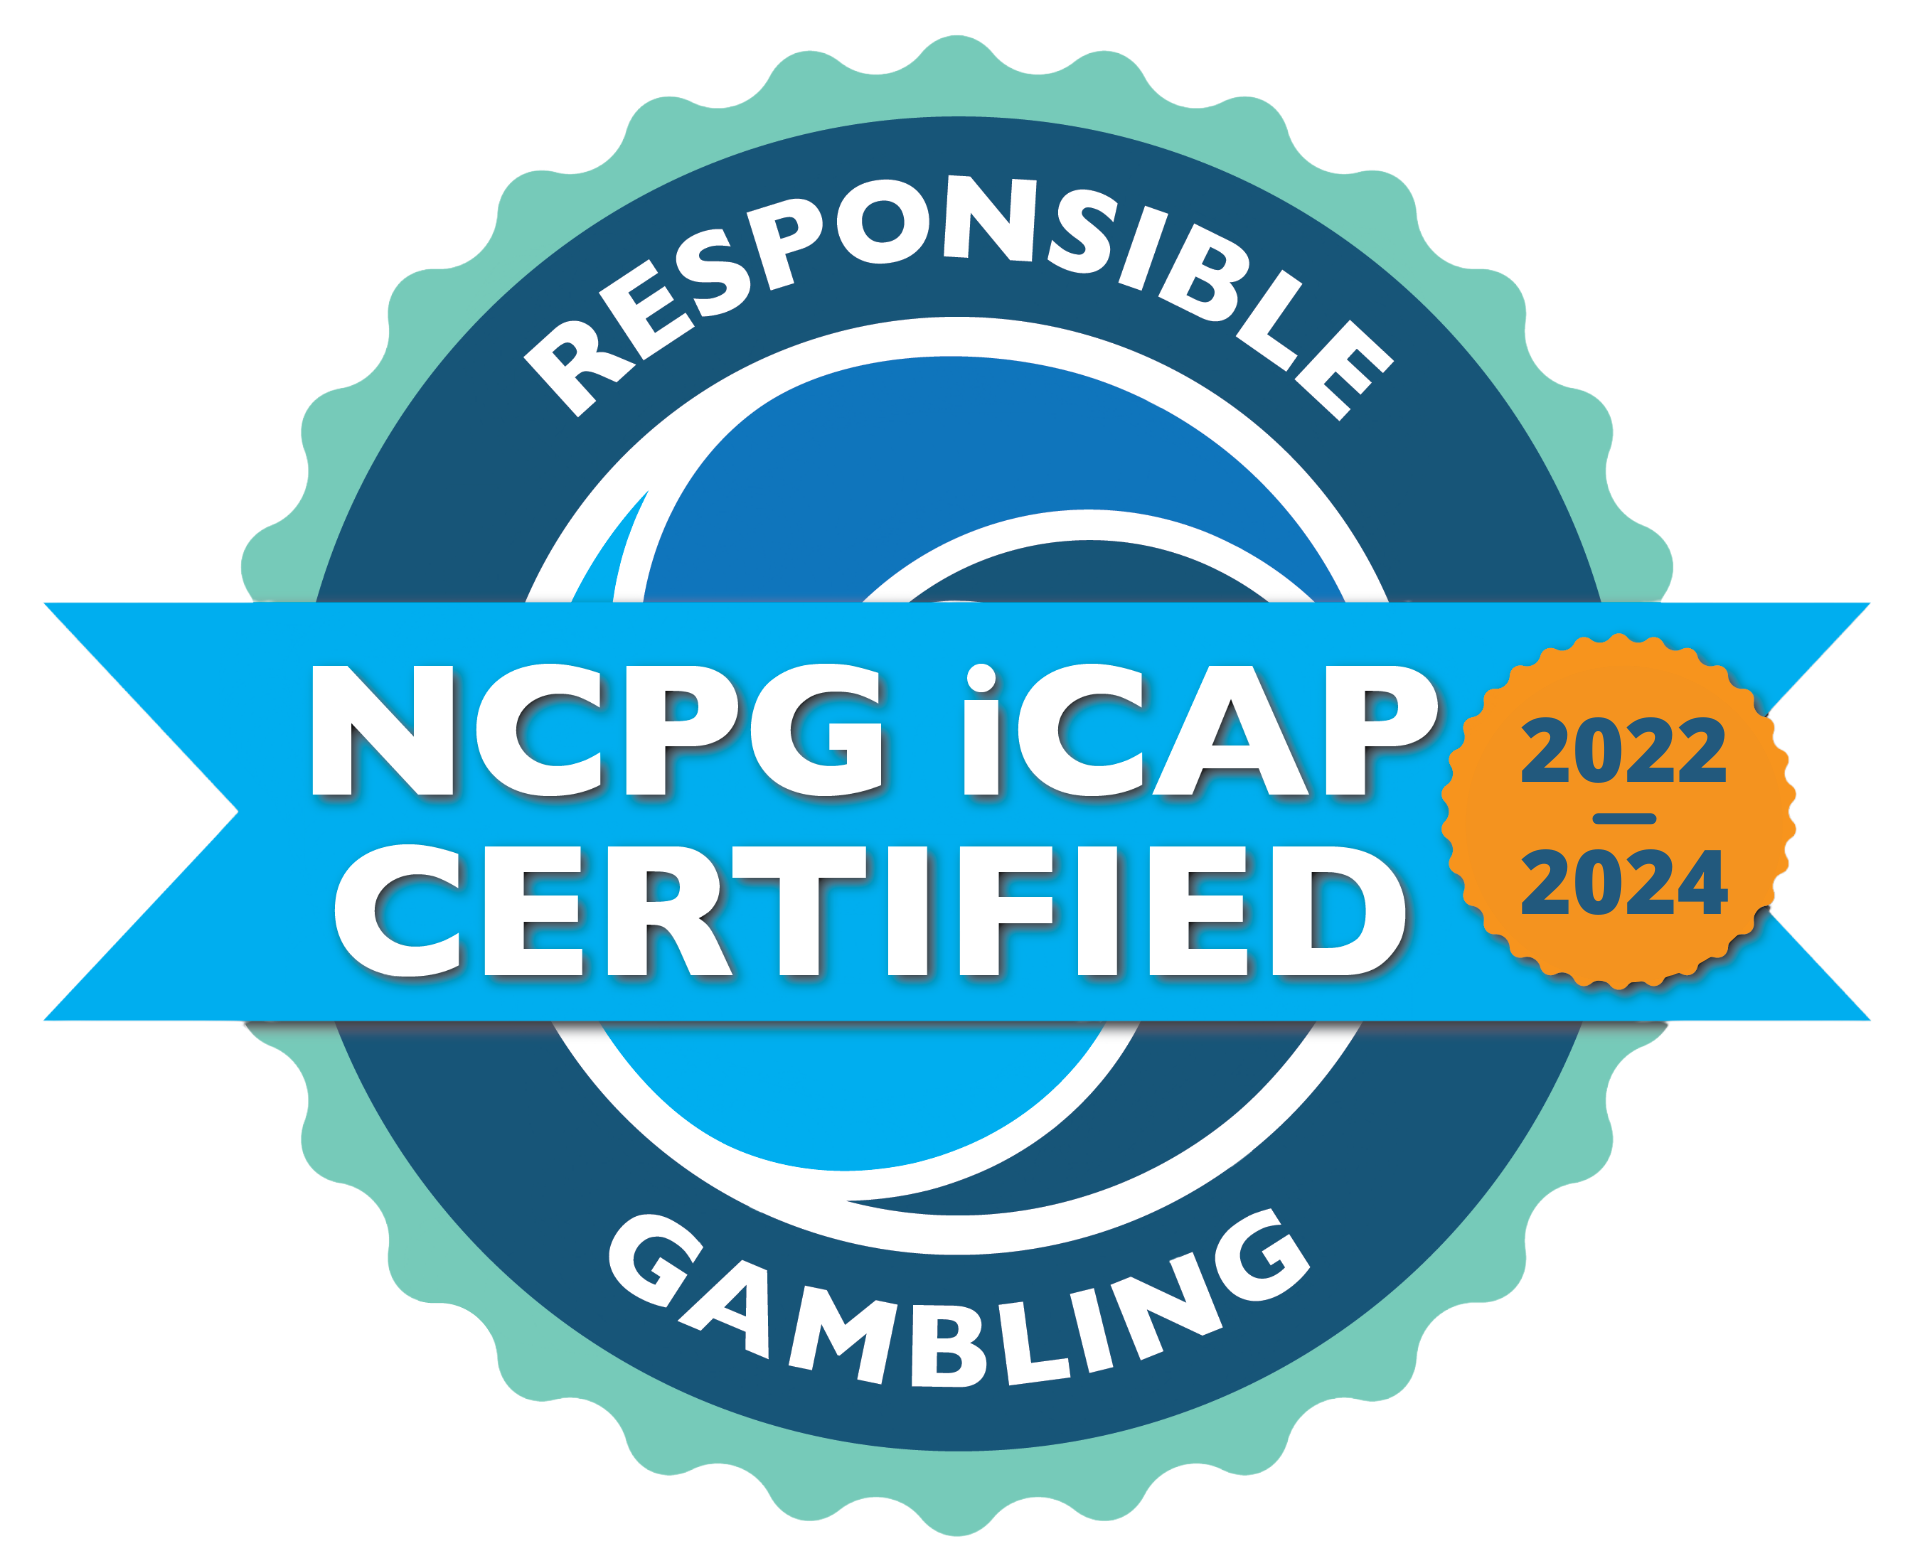 Responsible Gambling NCPG iCAP Certified 2022-2024 – Learn about the accreditation